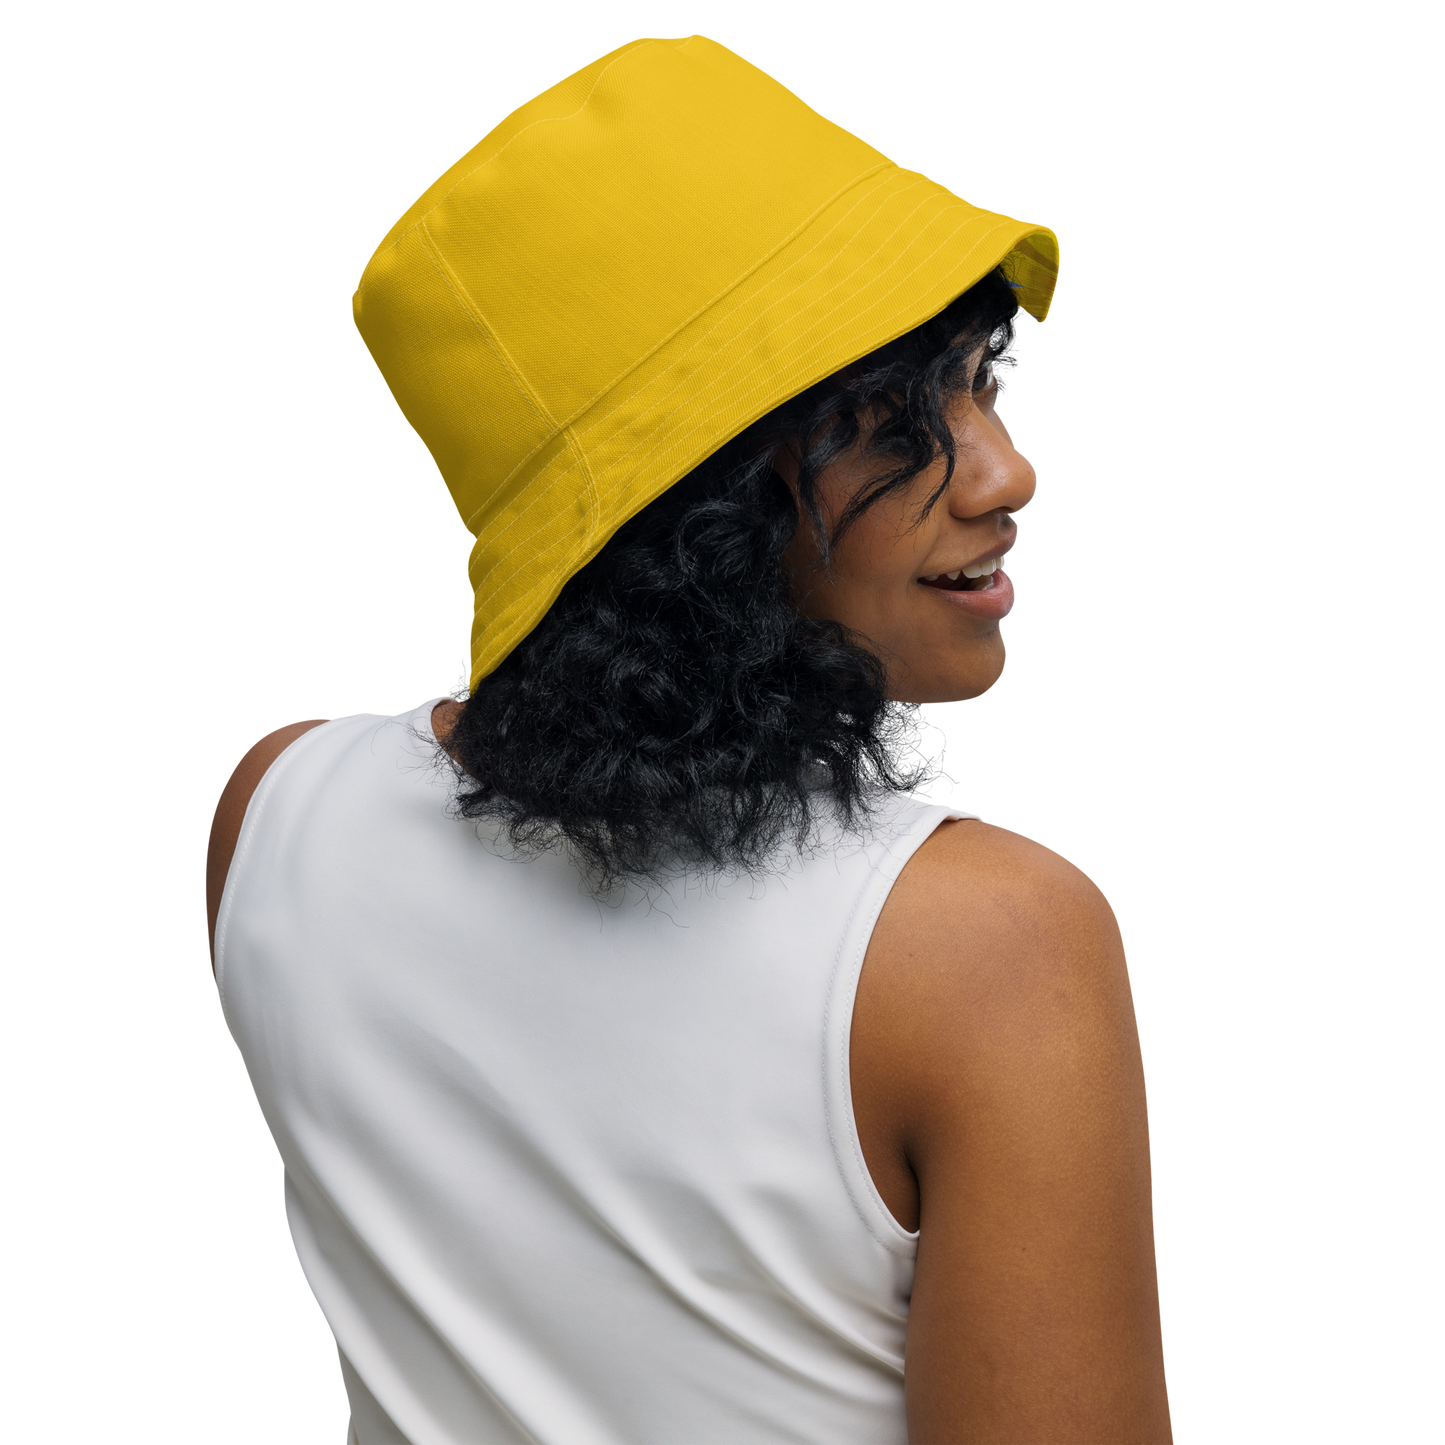 The FLOWER LOVE Collection - "Sunflower Sisters" Design Premium Reversible Bucket Hat - Yellow Inside - Sunflower Hat, Gifts for Her